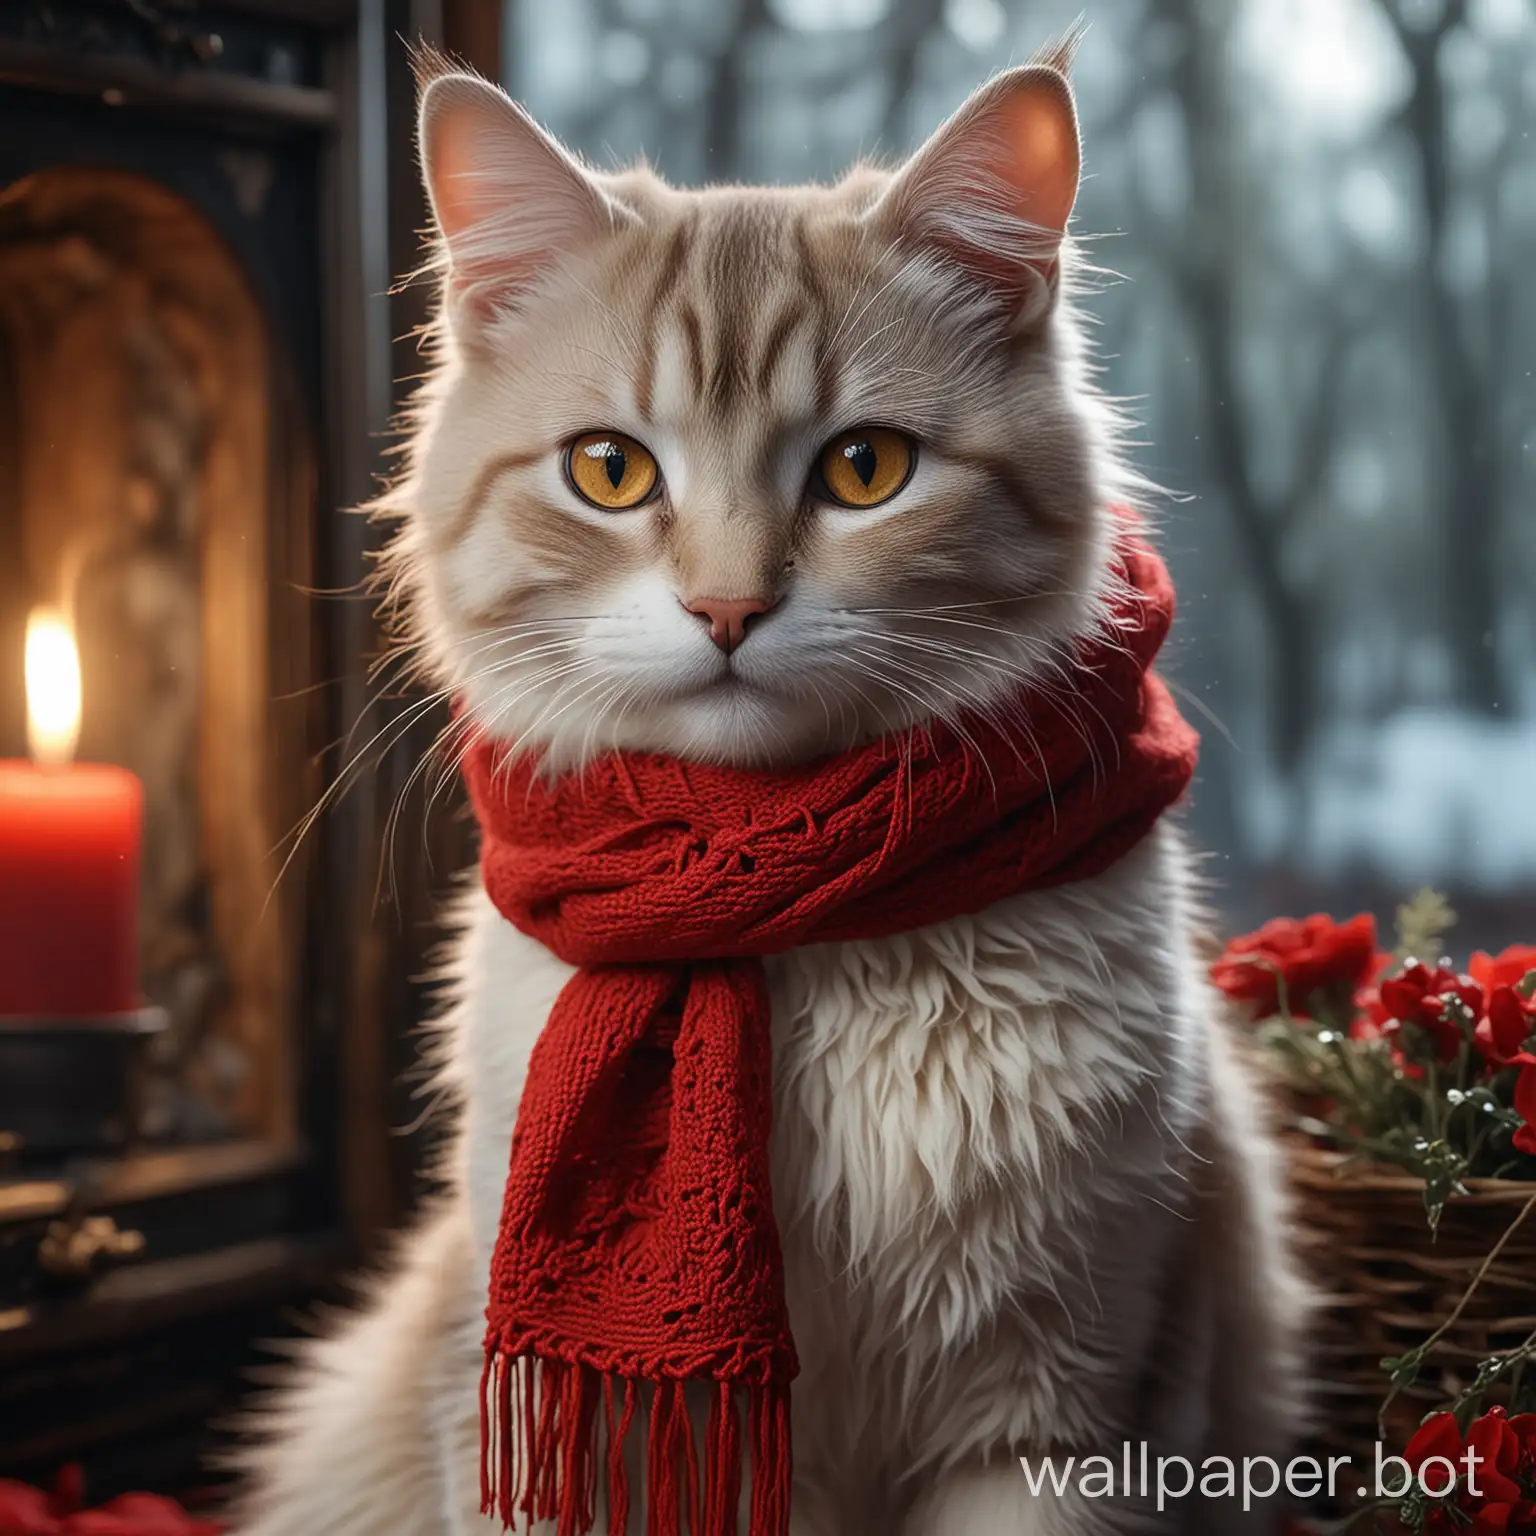 a cat with a red scarf, in the style of hygge atmosphere, 32k uhd, bella kotak, amedee ozenfant, meticulous design, cottagepunk